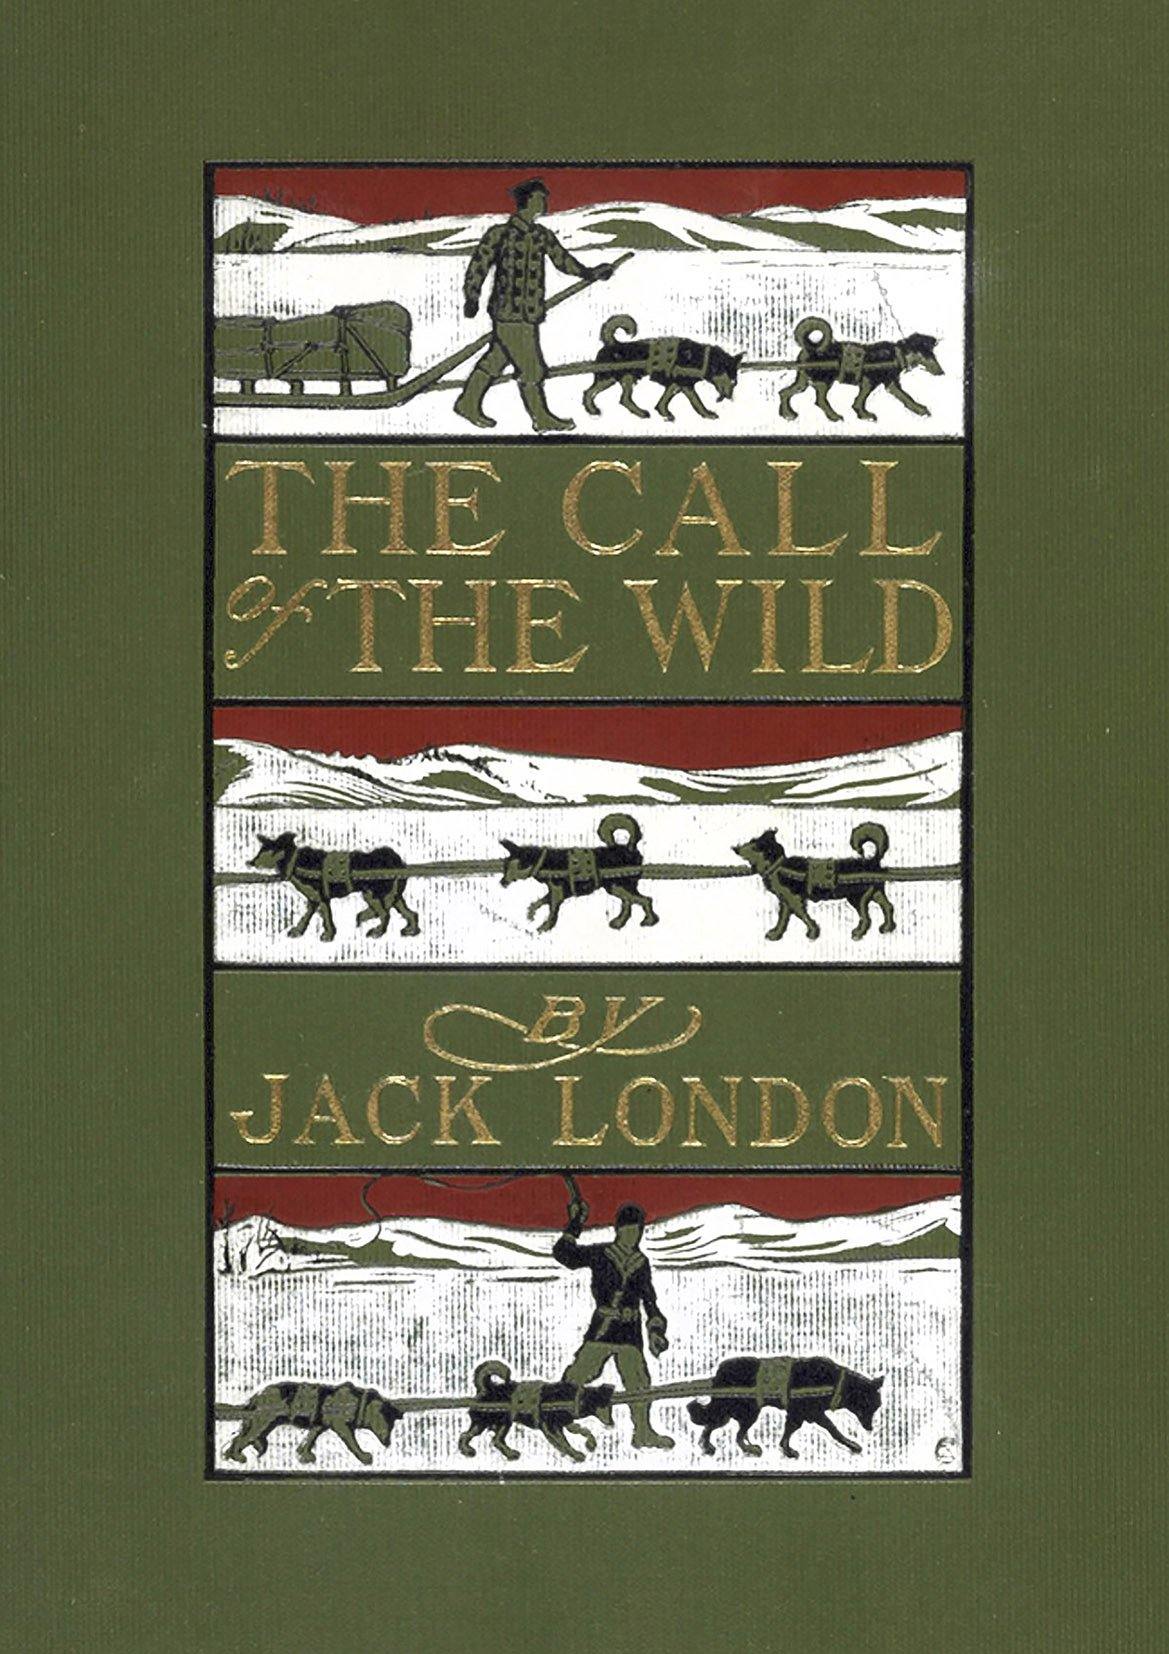 CALL OF THE WILD PRINT: Vintage Jack London Book Cover Art Poster - Pimlico Prints